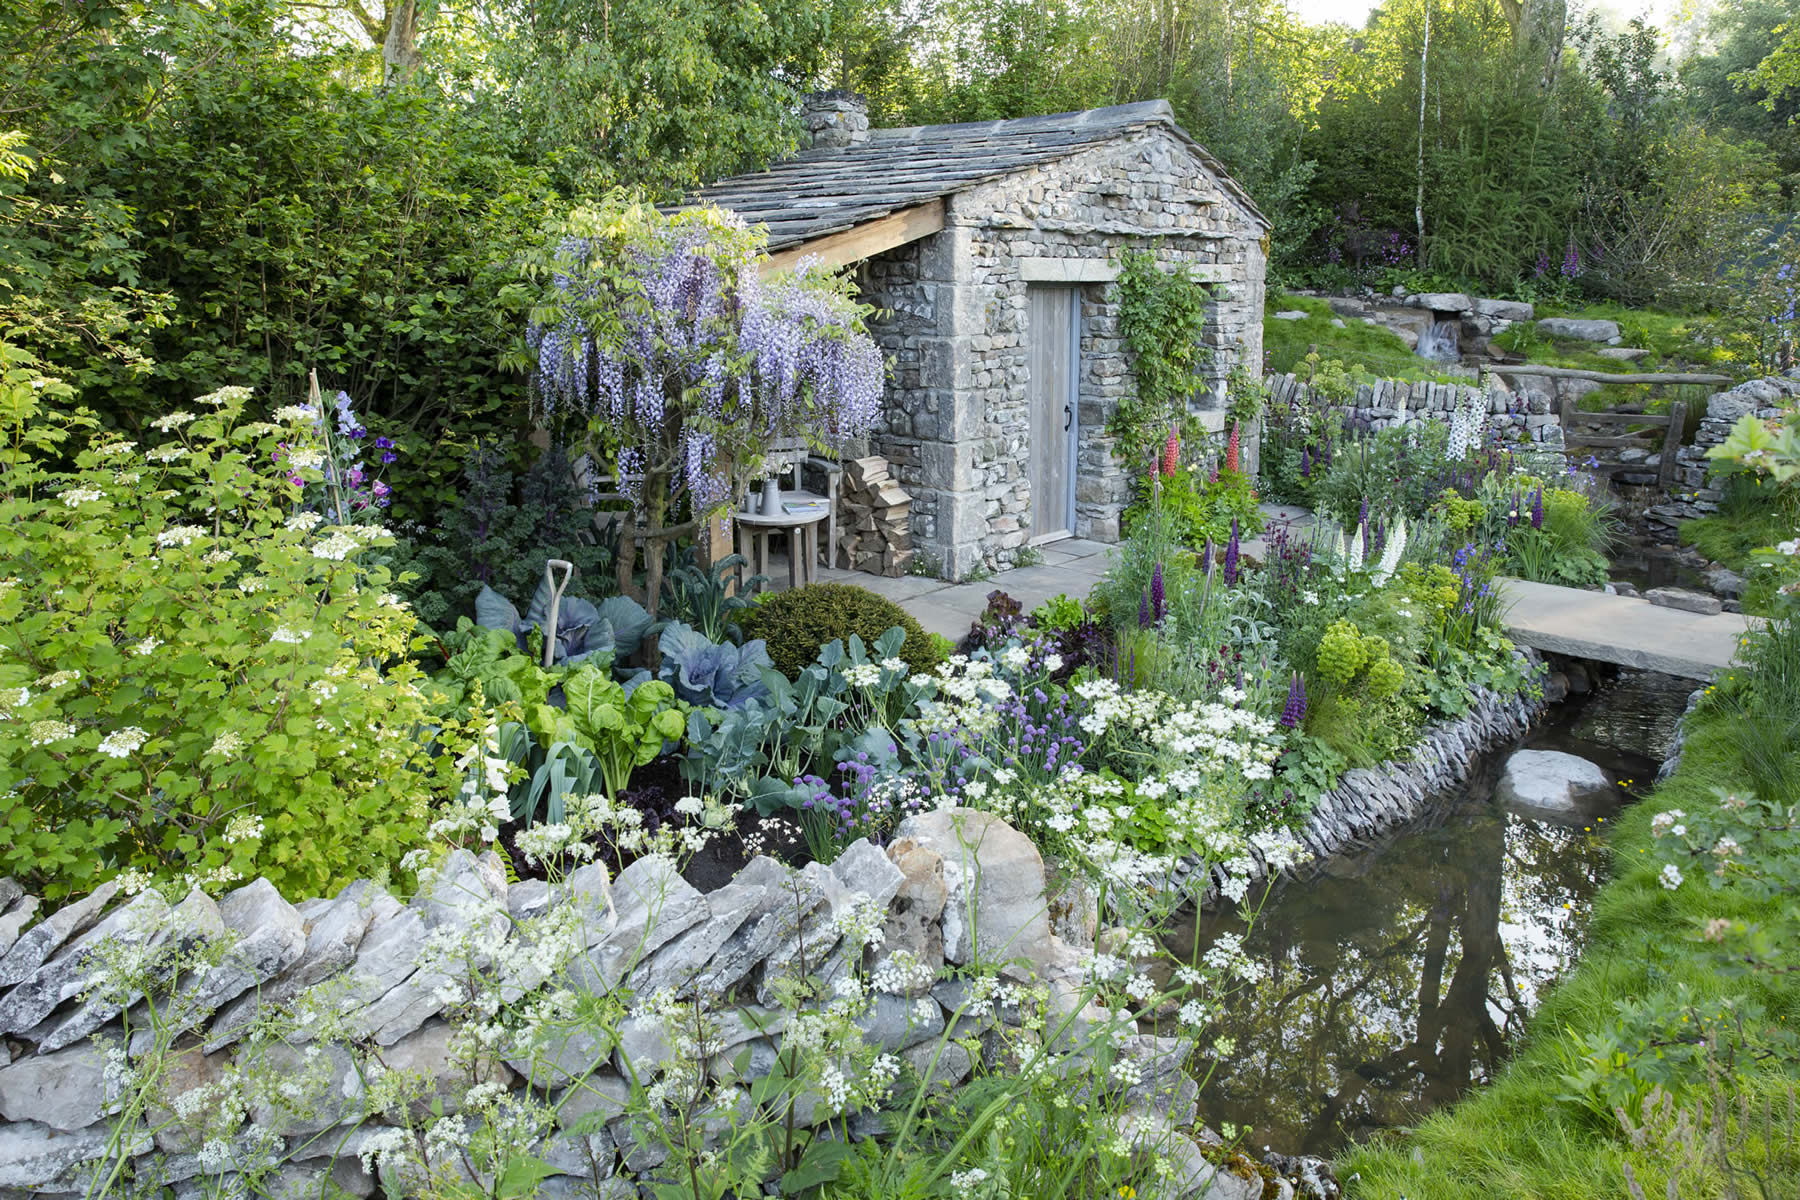 Image name wtylandformchelsea19 the 24 image from the post RHS Chelsea Flower Show - Welcome to Yorkshire Garden 2018 in Yorkshire.com.